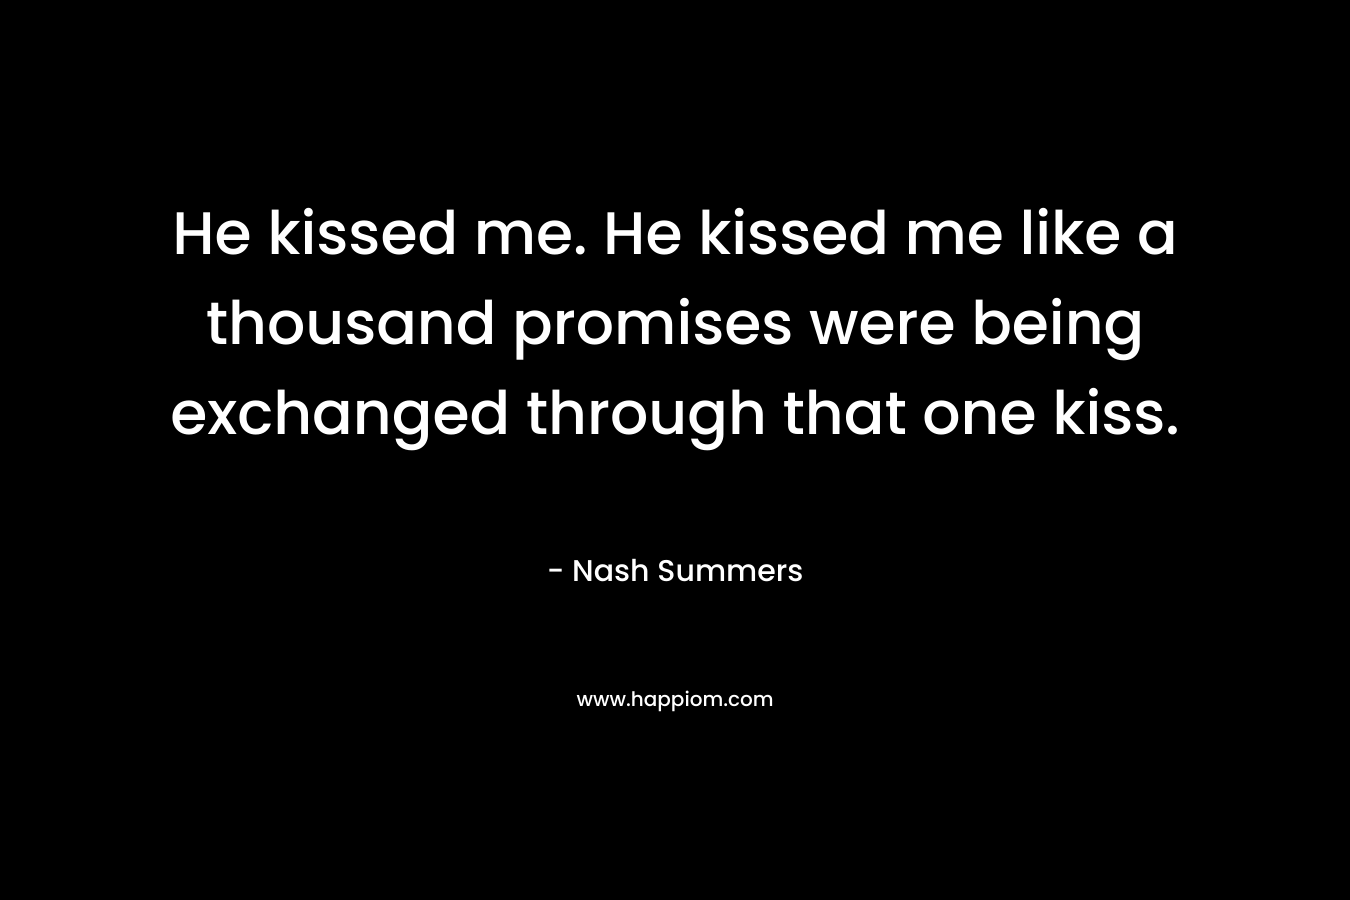 He kissed me. He kissed me like a thousand promises were being exchanged through that one kiss. – Nash Summers